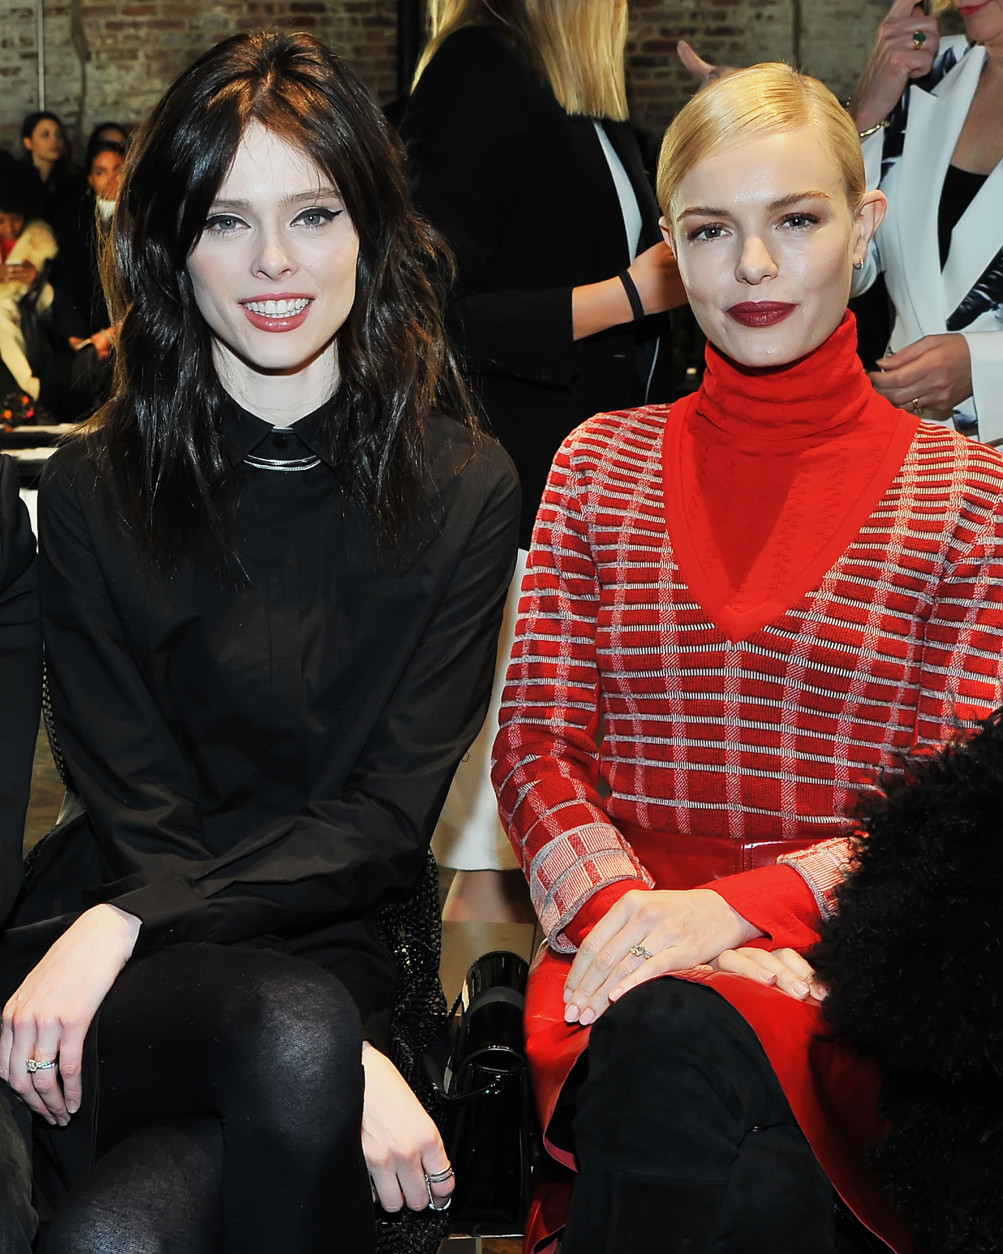 Model Coco Rocha with actress Kate Bosworth. (Shannon Finney Photography)